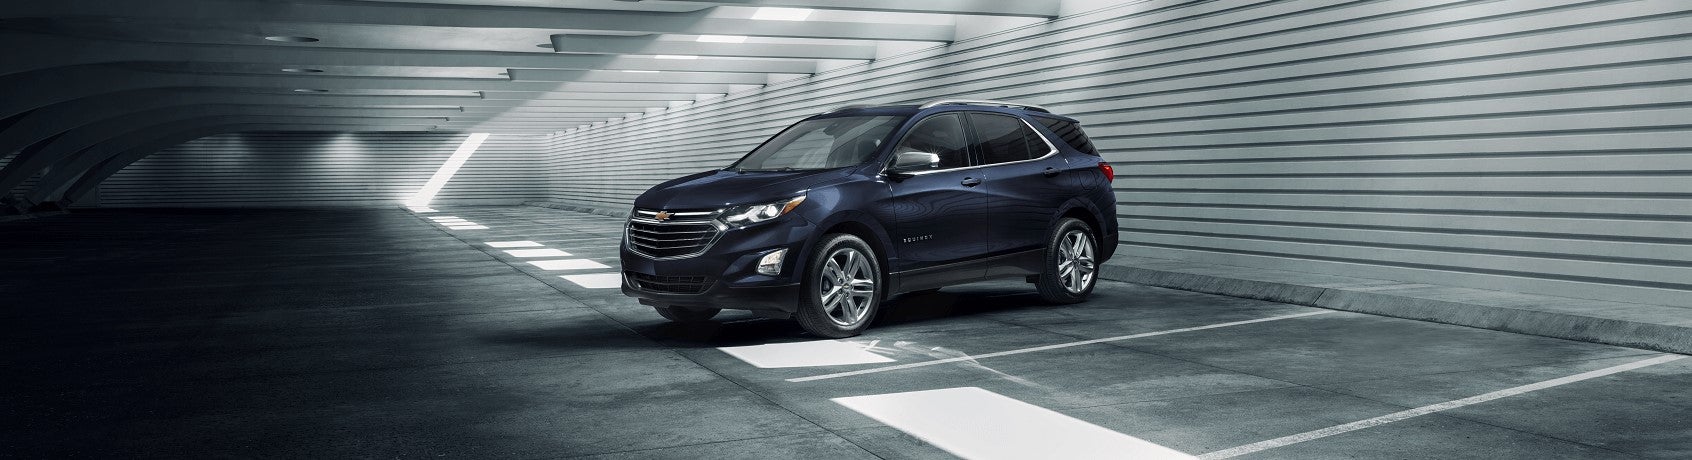 Chevy Equinox for Sale Indianapolis IN